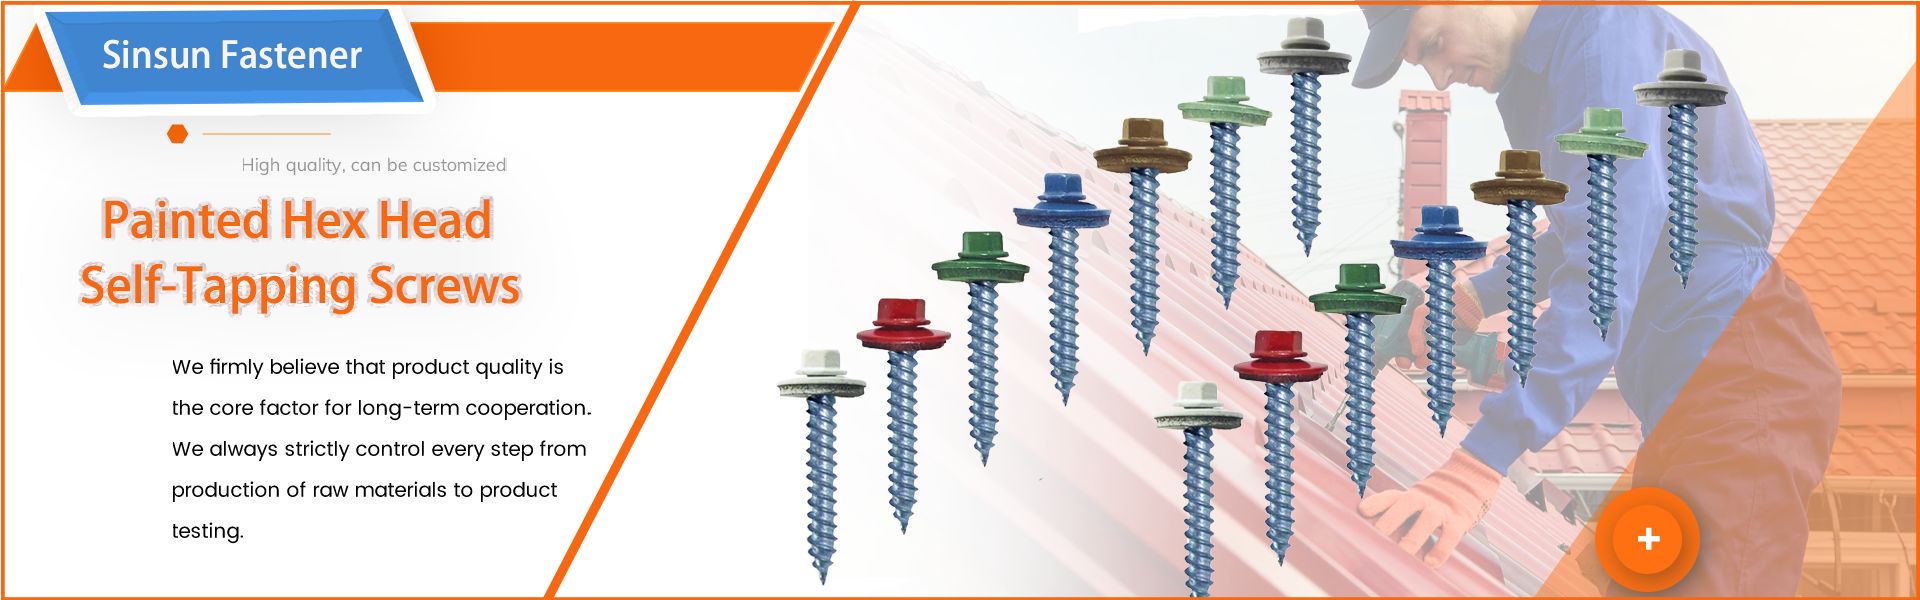 Painted Hex Head Self-Tapping Screw